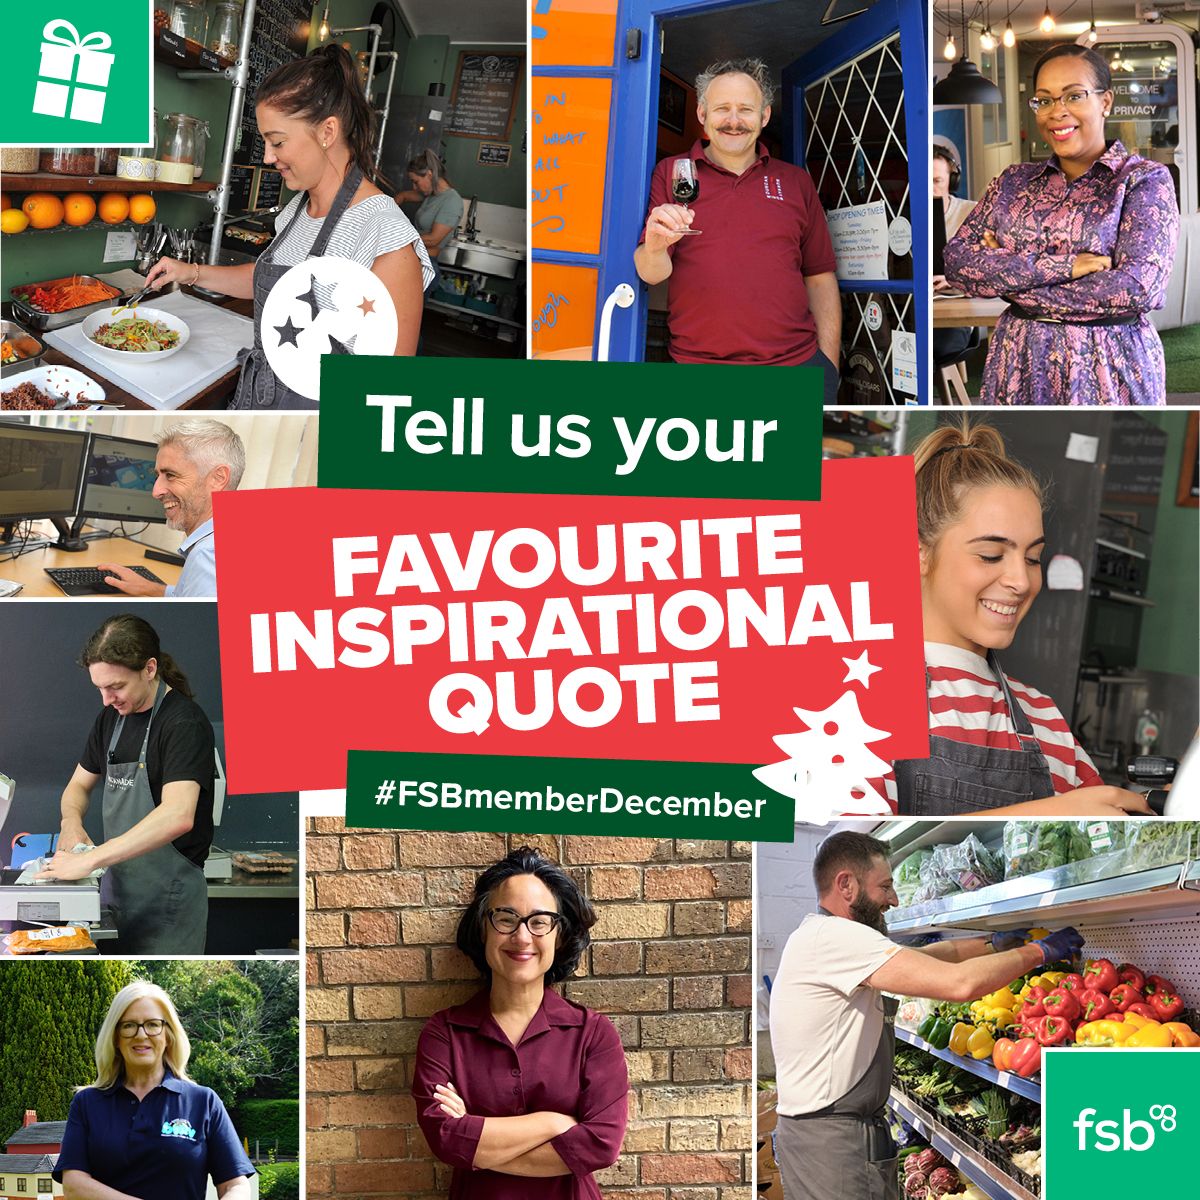 We've reached the final day of #FSBmemberDecember. A huge thanks to all of our brilliant FSB members that took part! For your LAST CHANCE TO WIN an FSB Festive Gift Box, share your favourite inspirational quote that keeps you motivated in business below.